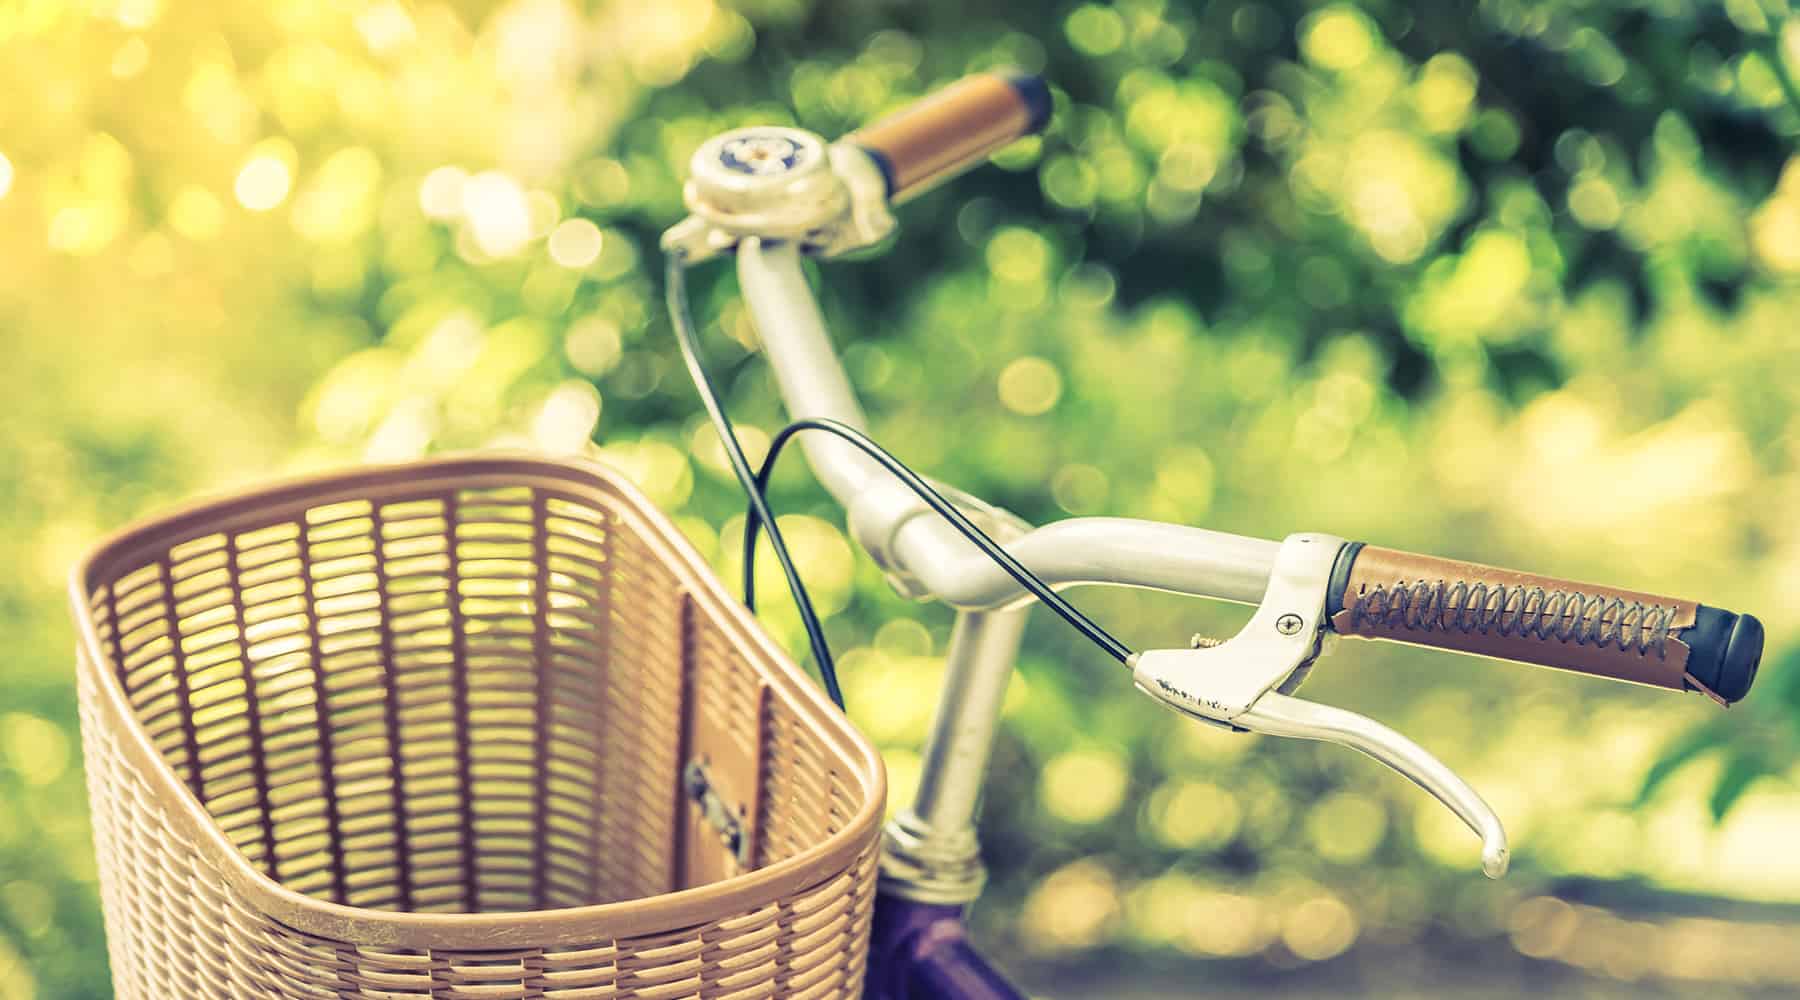 Bicycle with basket